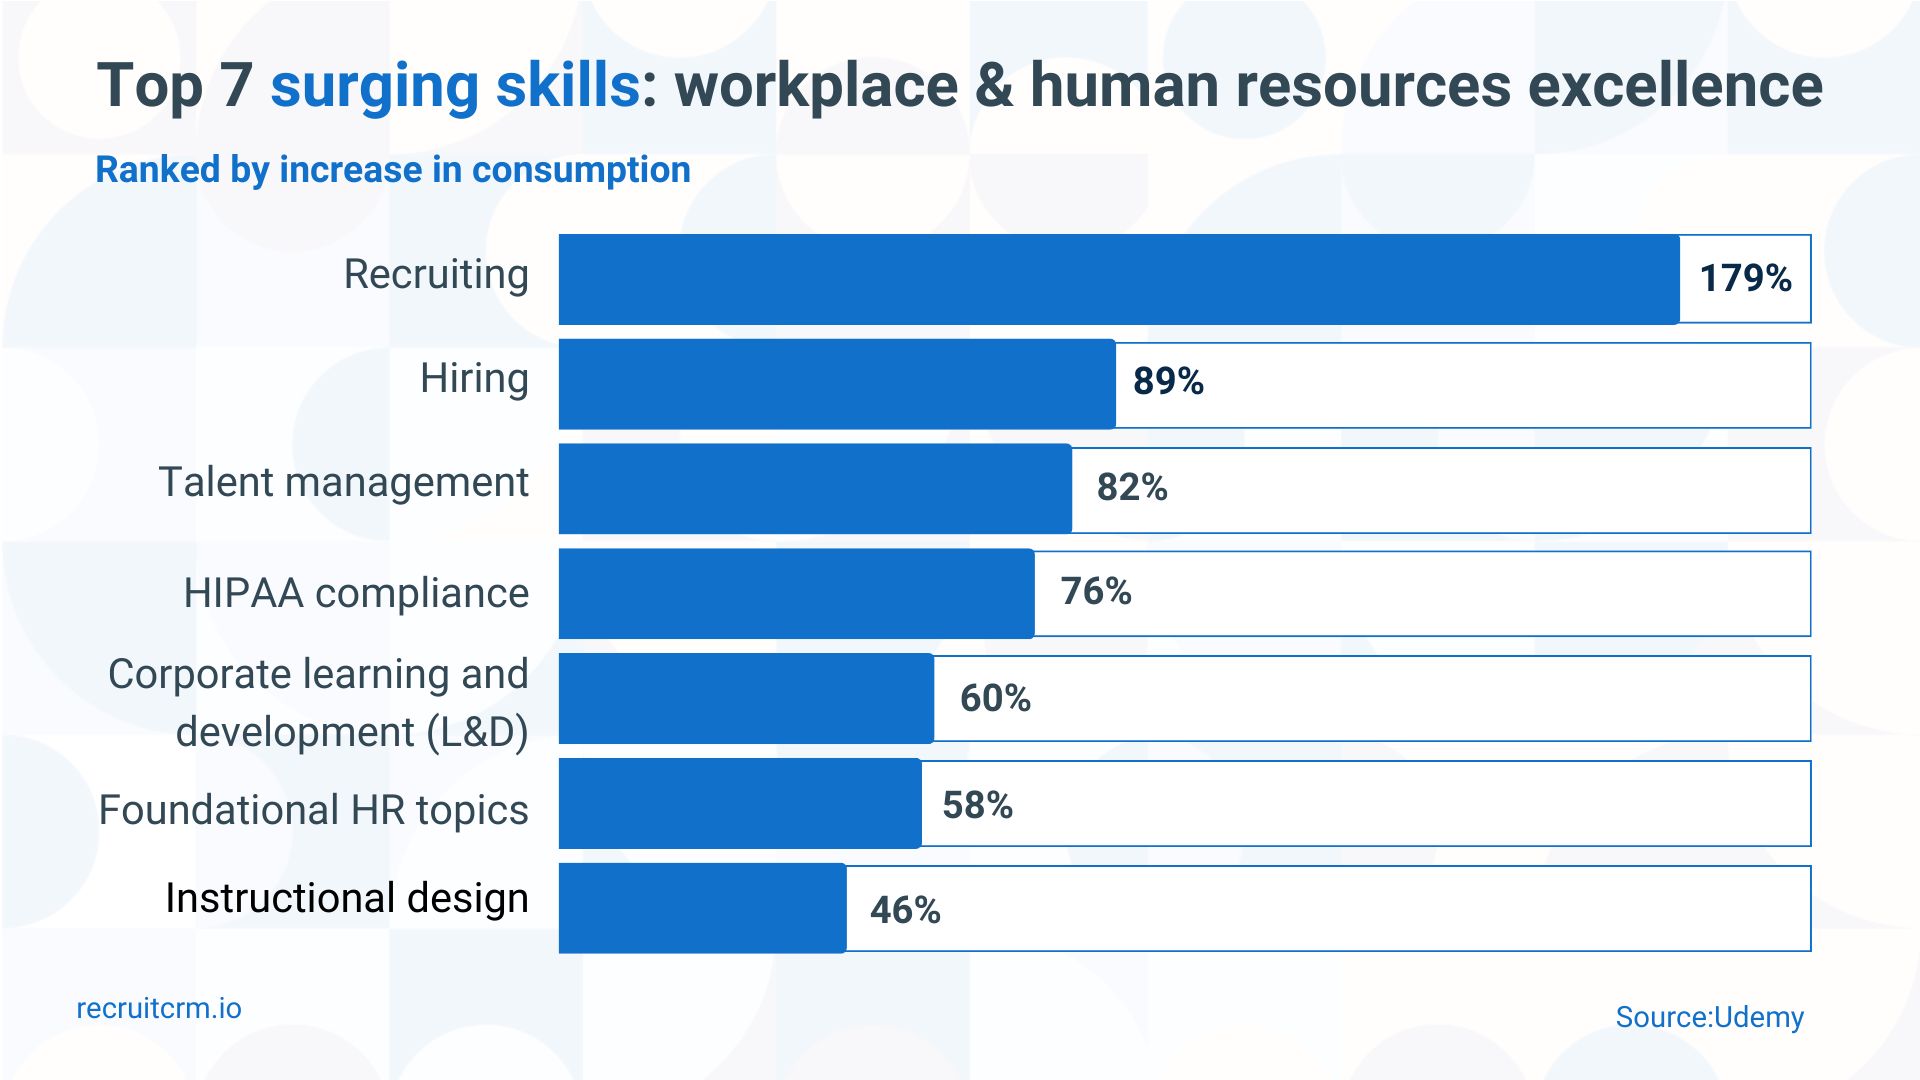 Surging skills: Workplace & human resources excellence